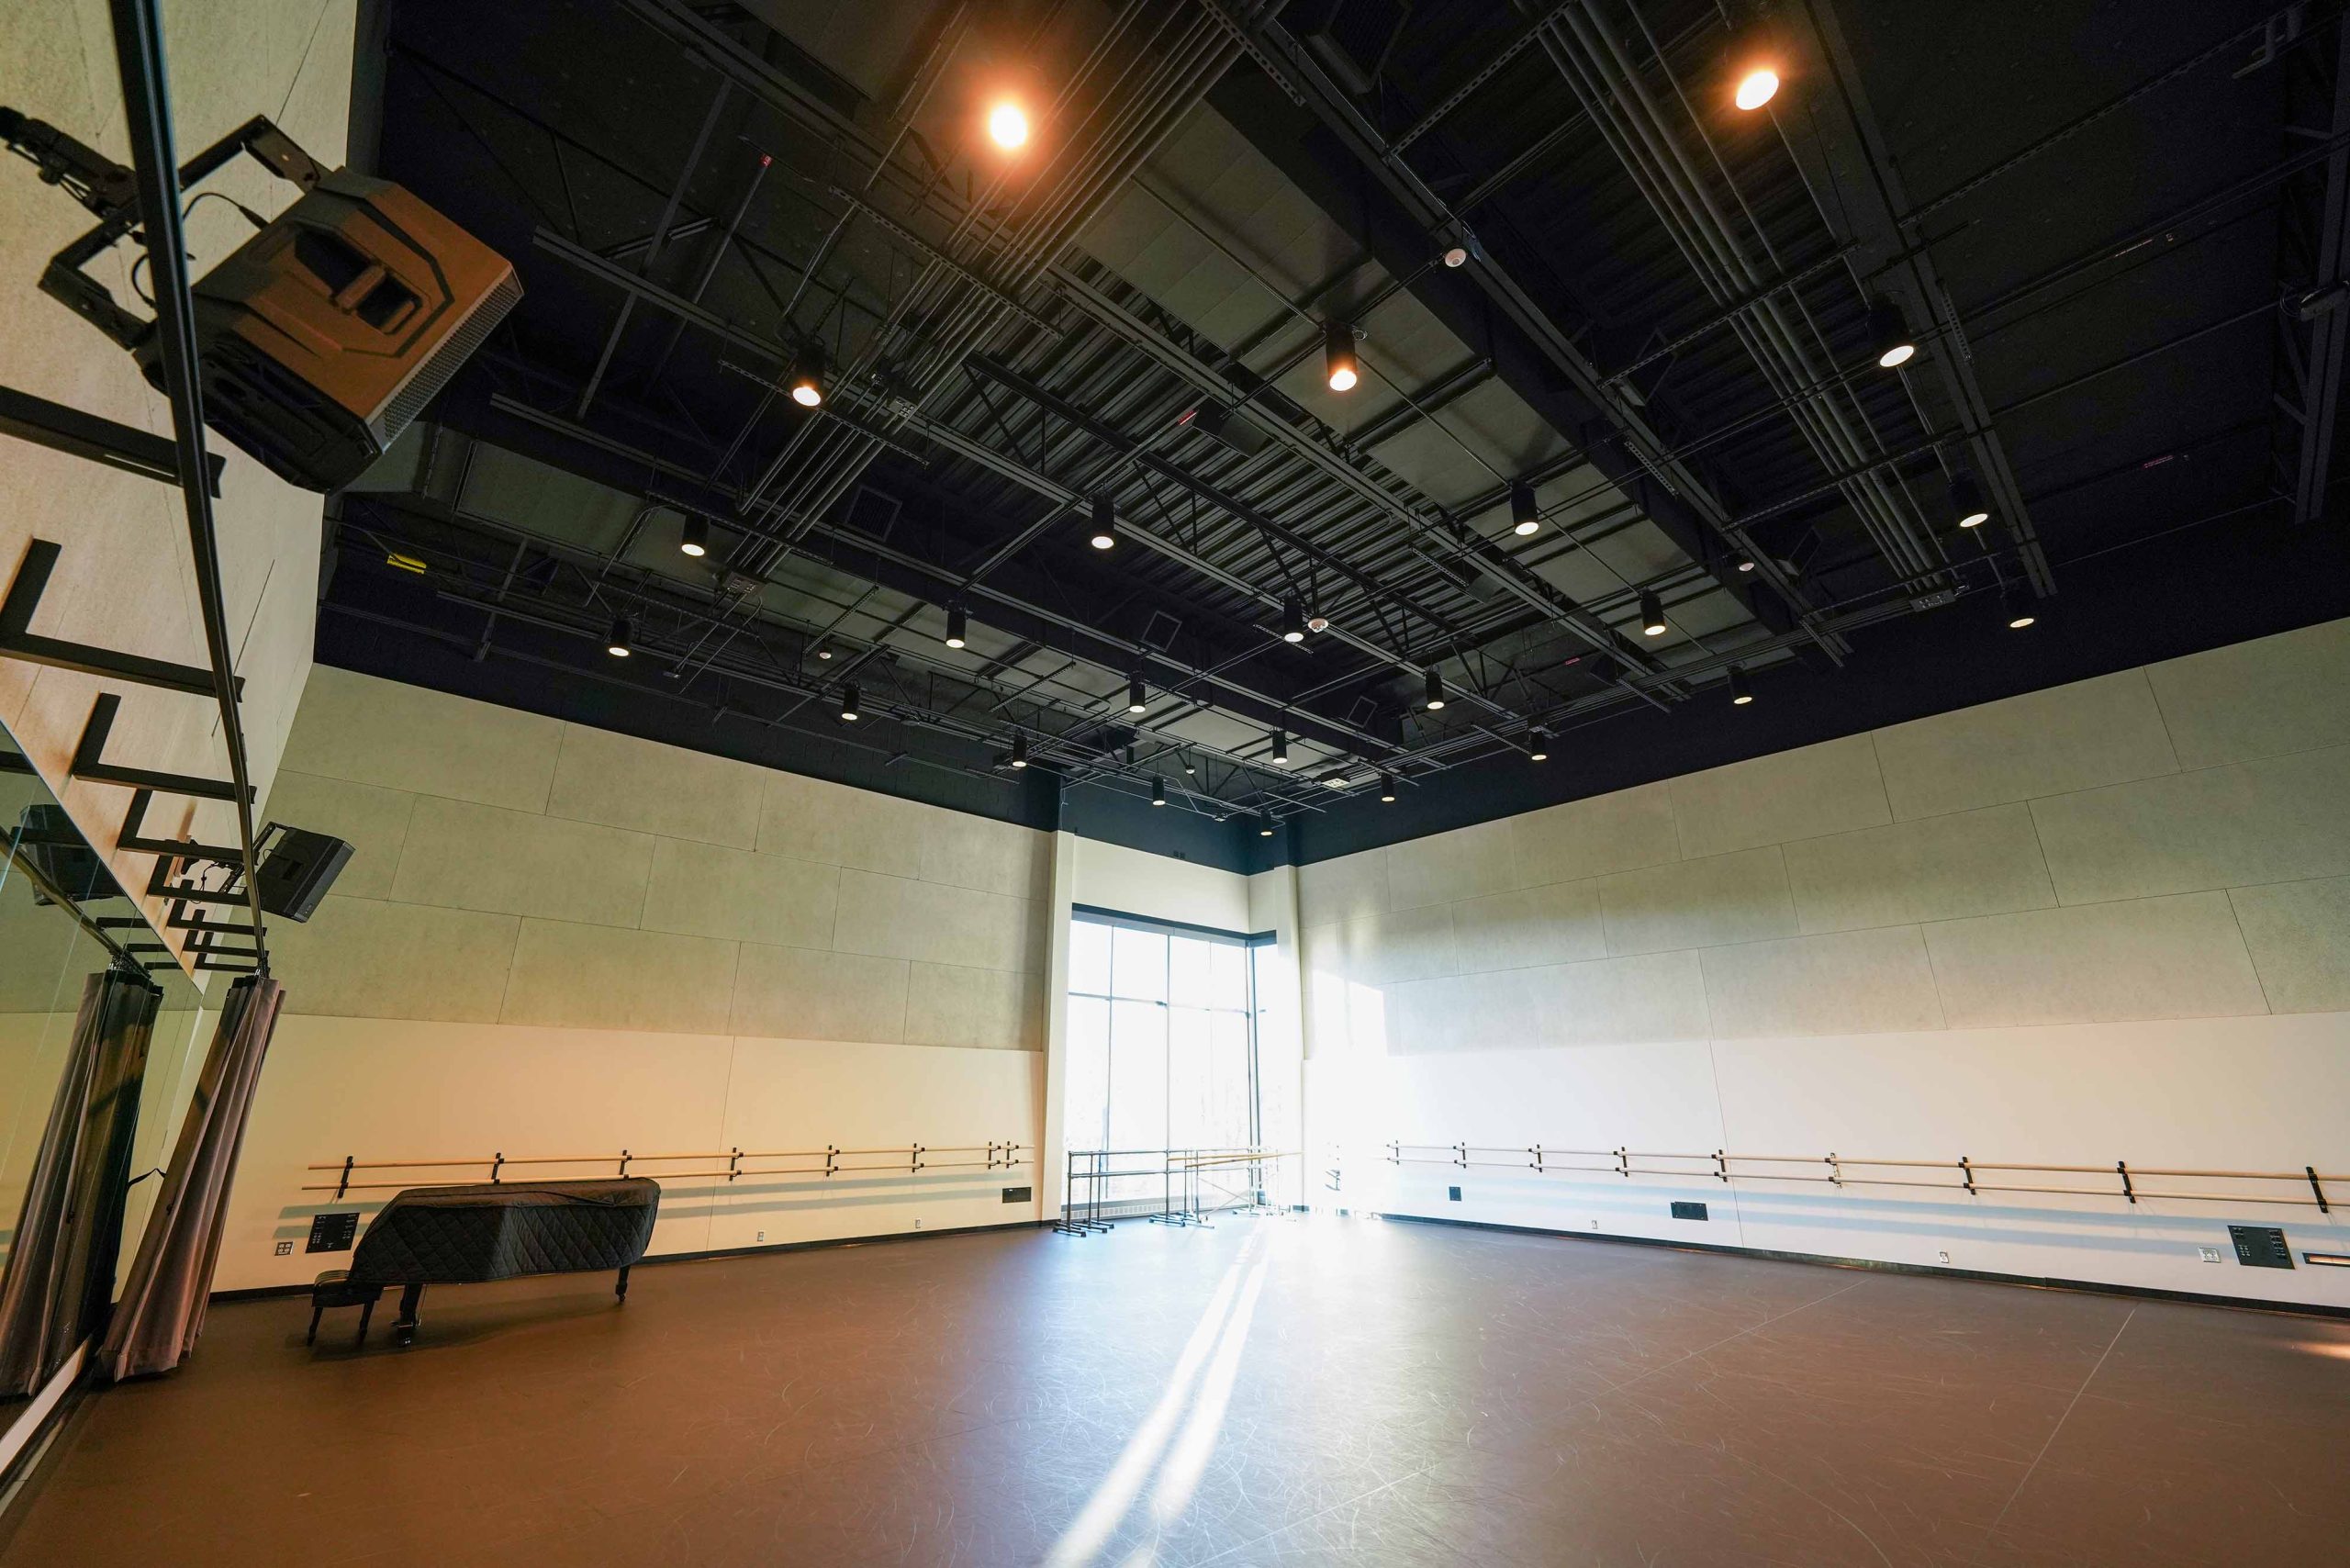 A dance studio with stone-like walls; light shines in from tall corner windows.